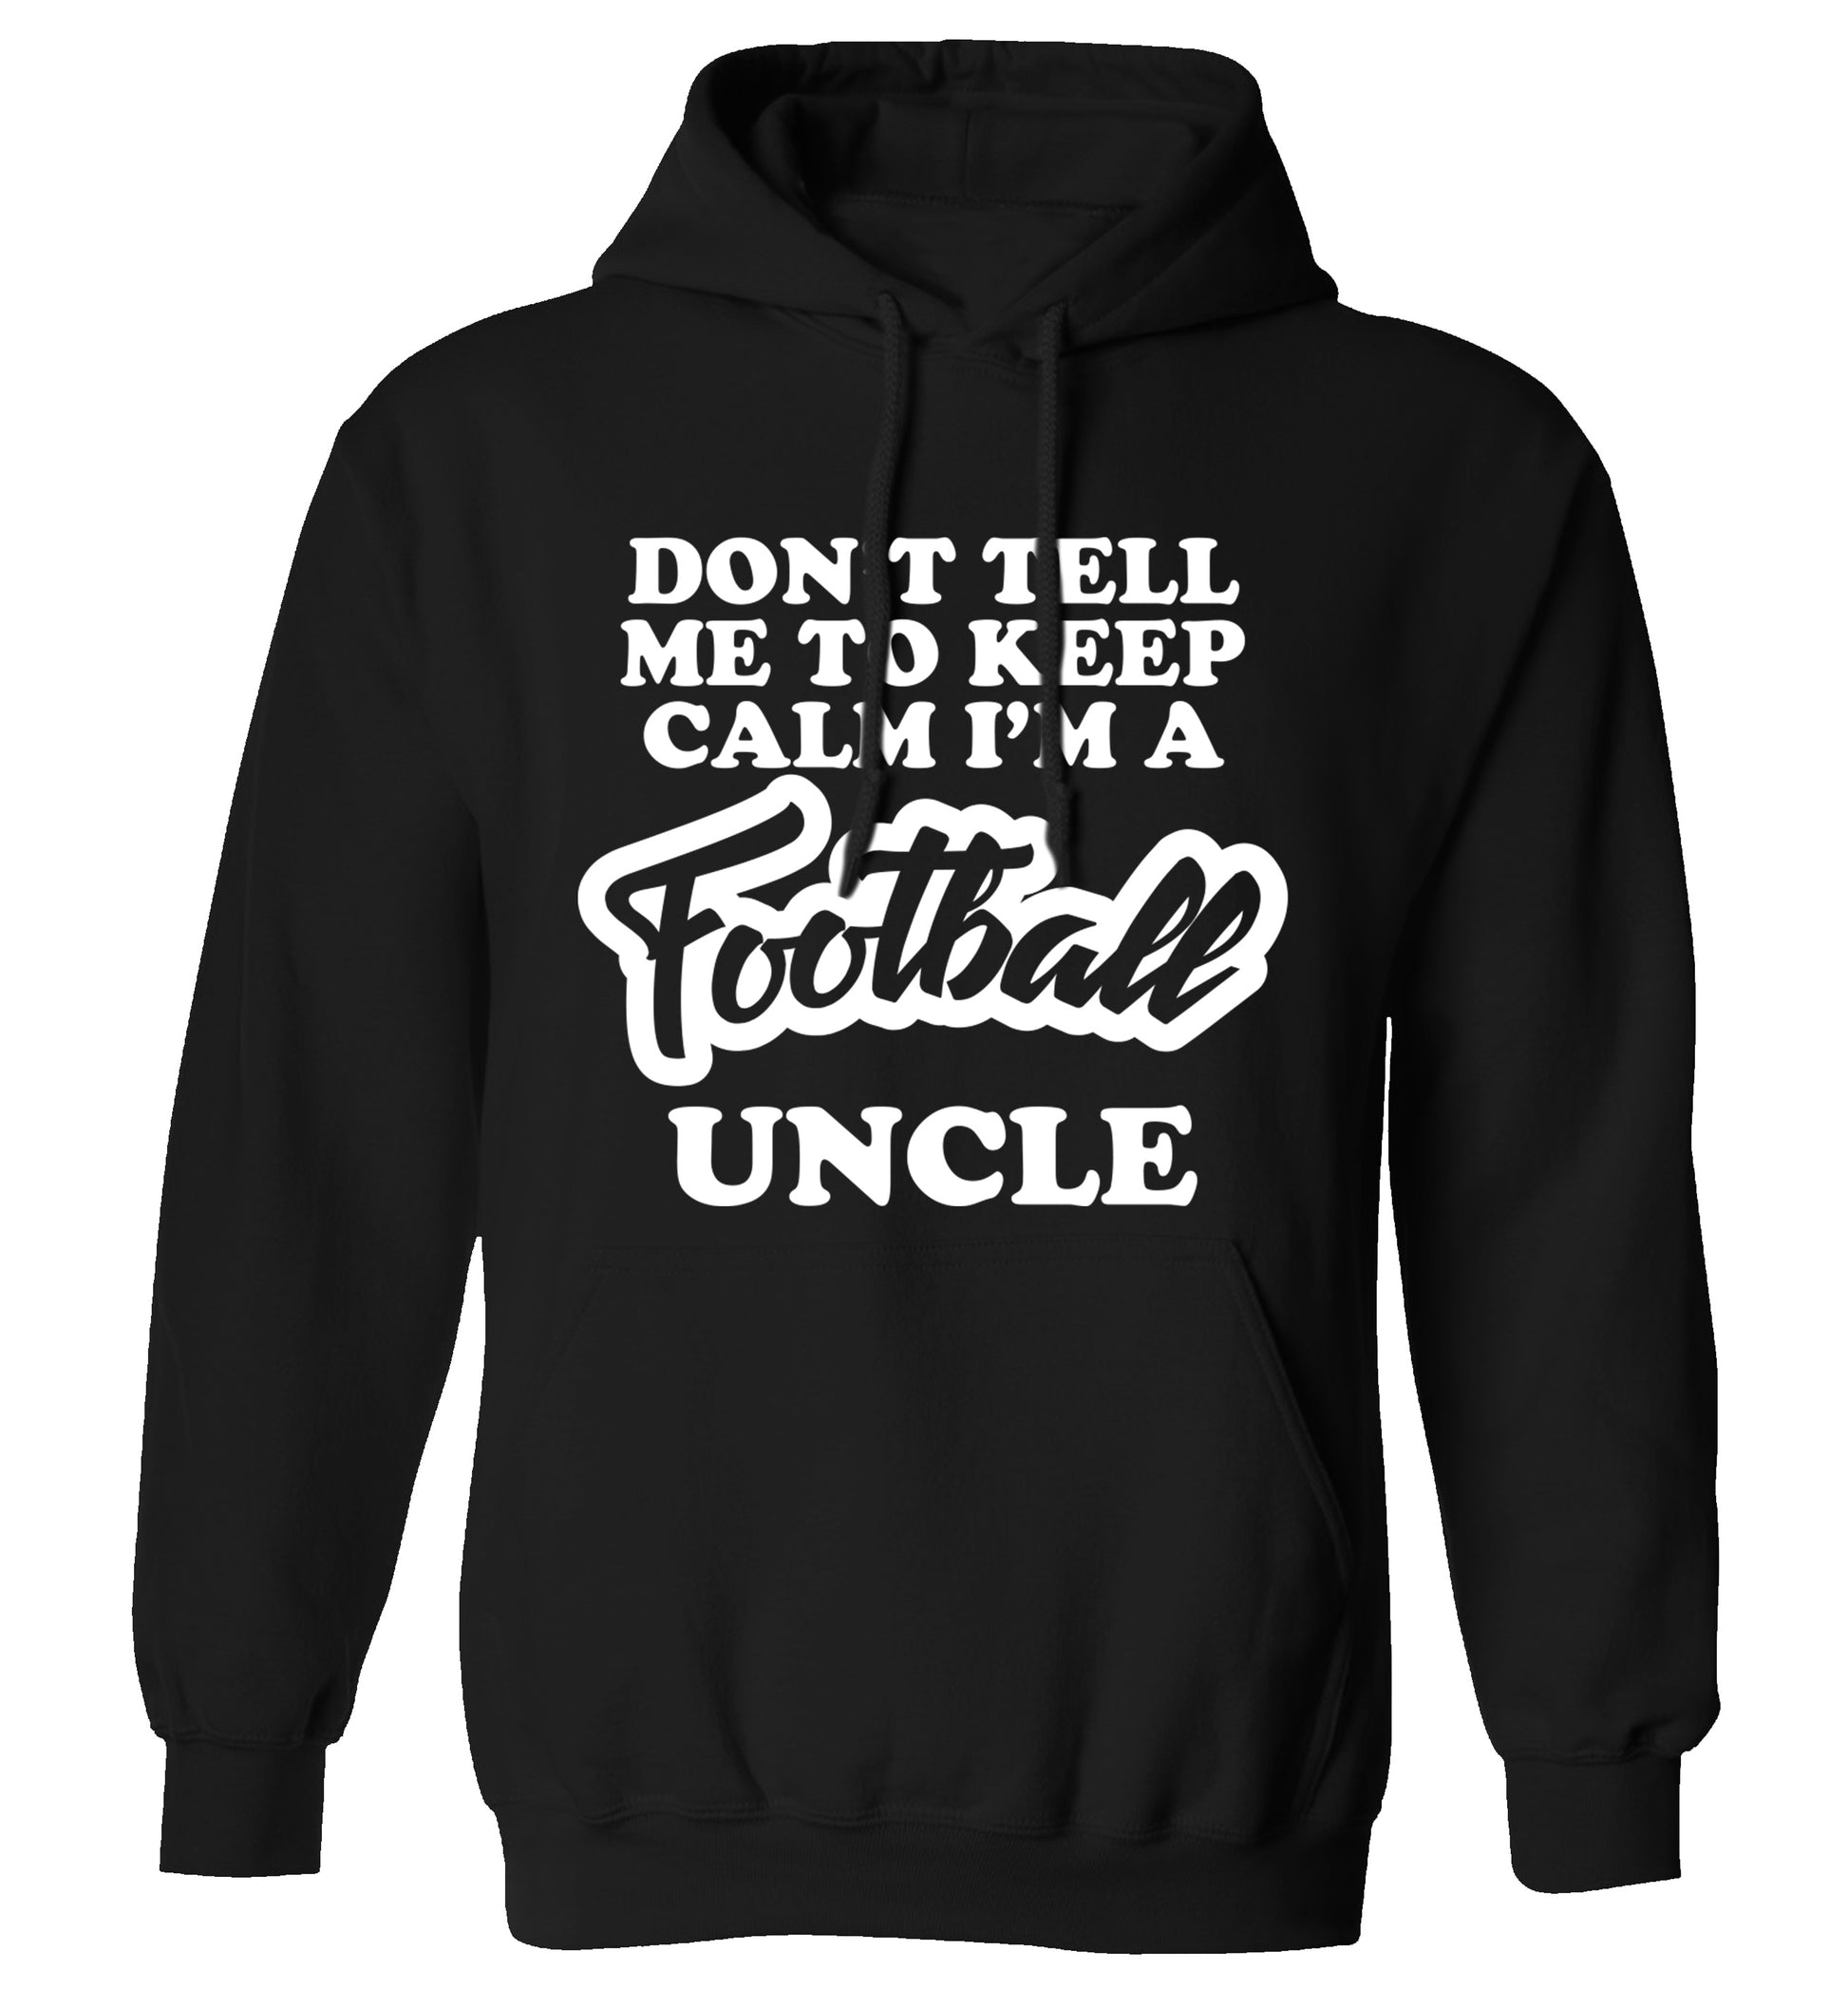 Don't tell me to keep calm I'm a football uncle adults unisexblack hoodie 2XL